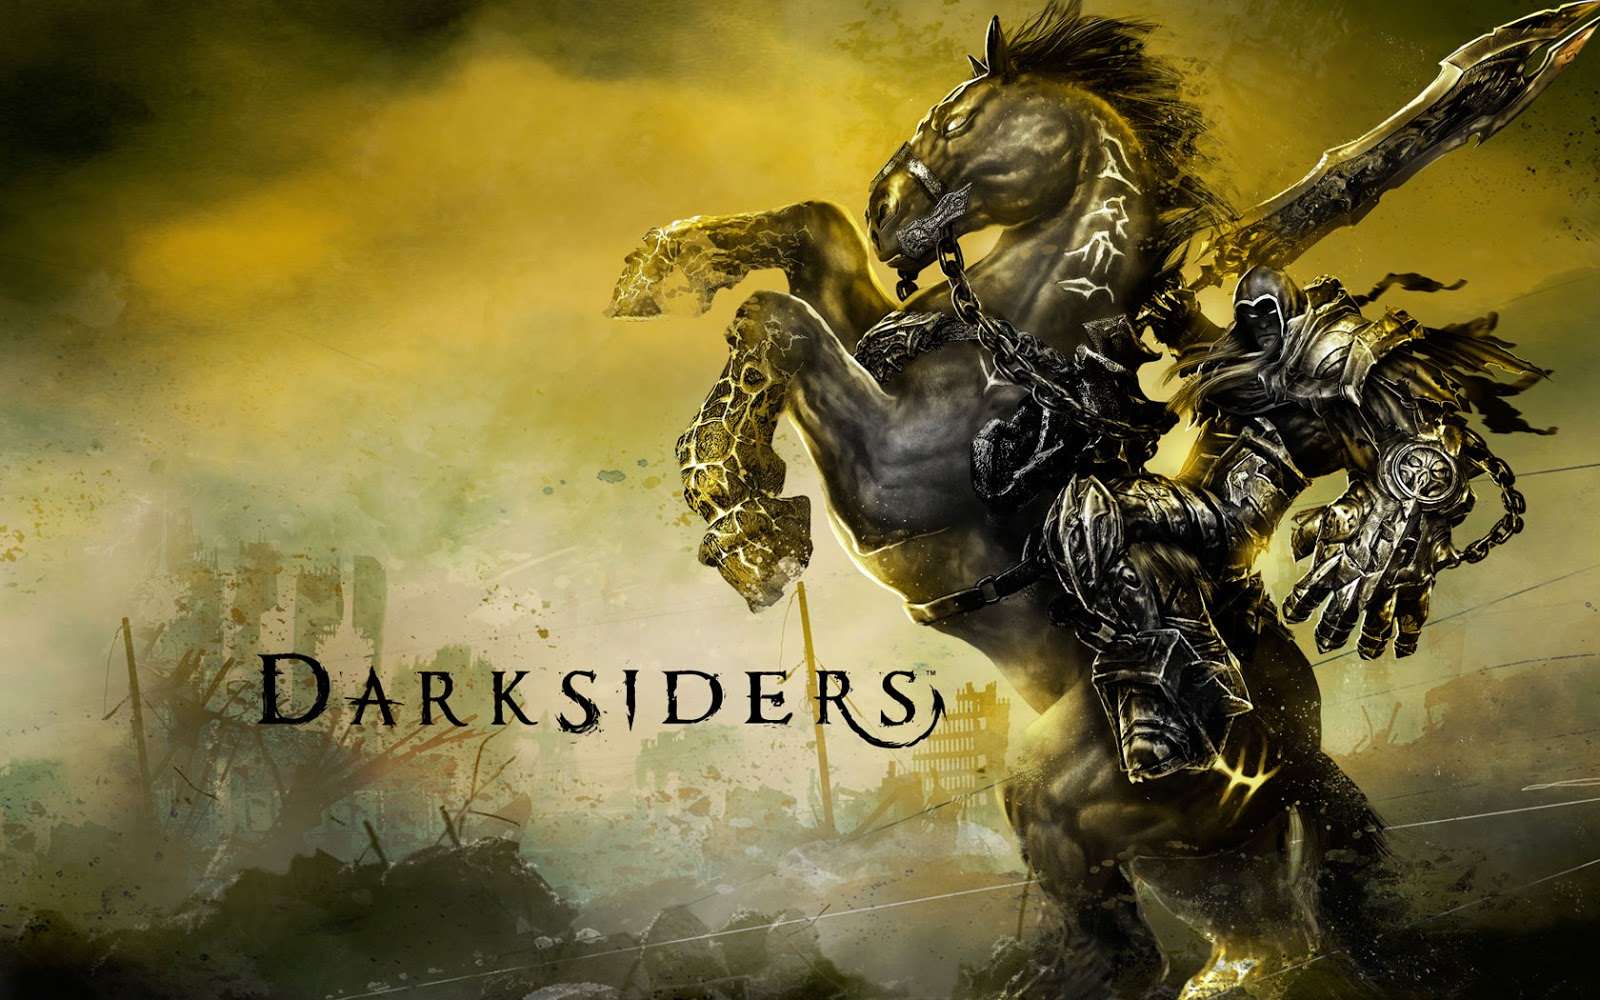 Darksiders PC Game Preview